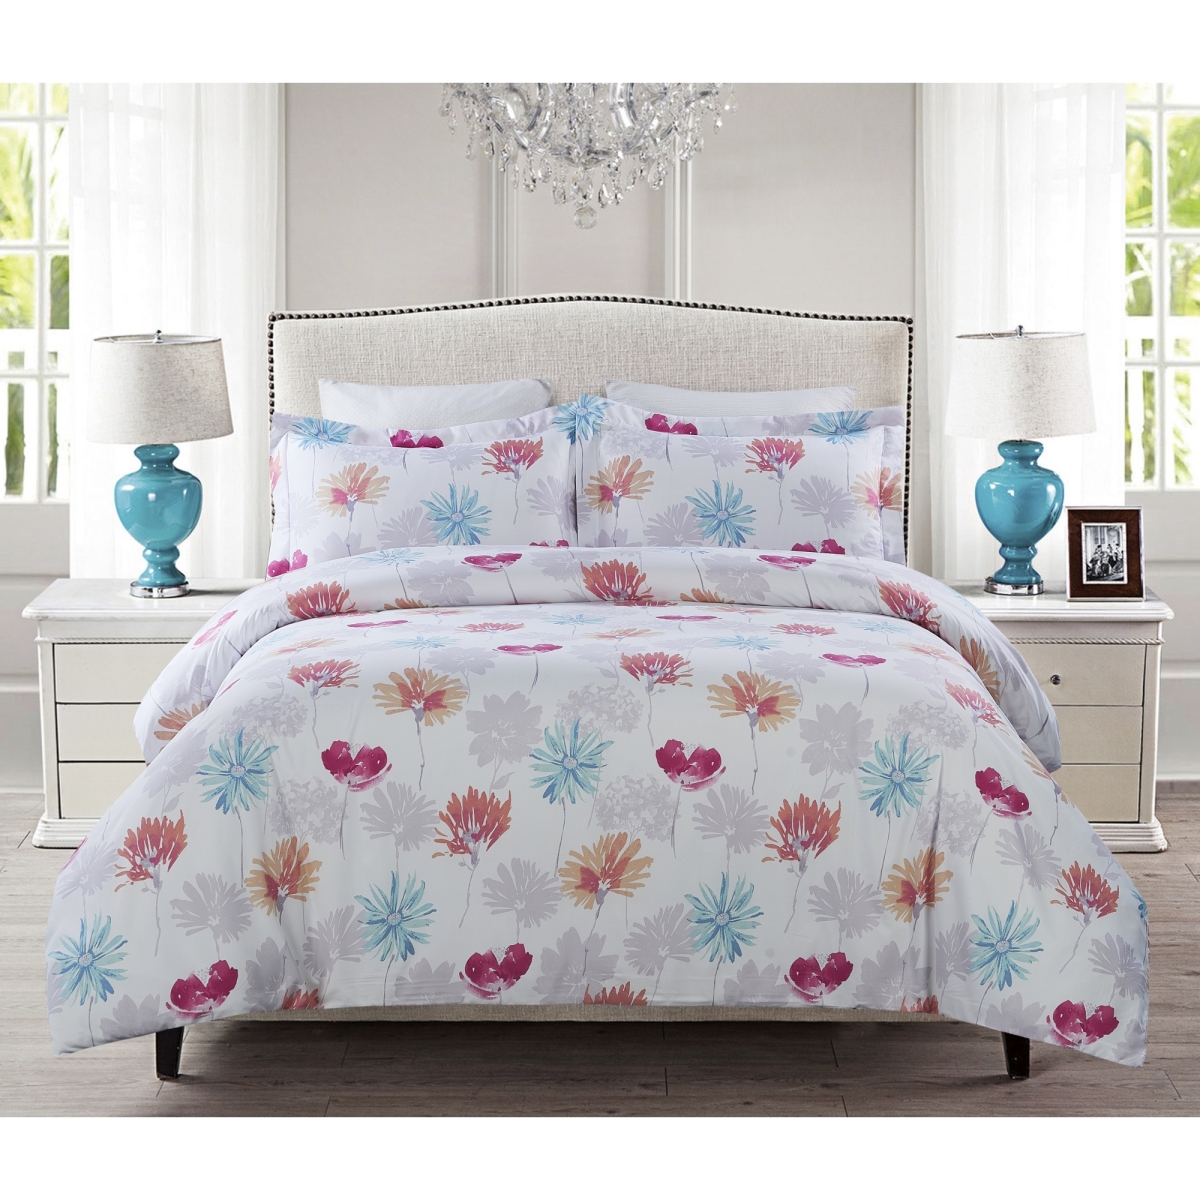 Whtx636-cfq Microfiber Duvet Cover Set With Printed Colored Flowers, Queen Size - 3 Piece